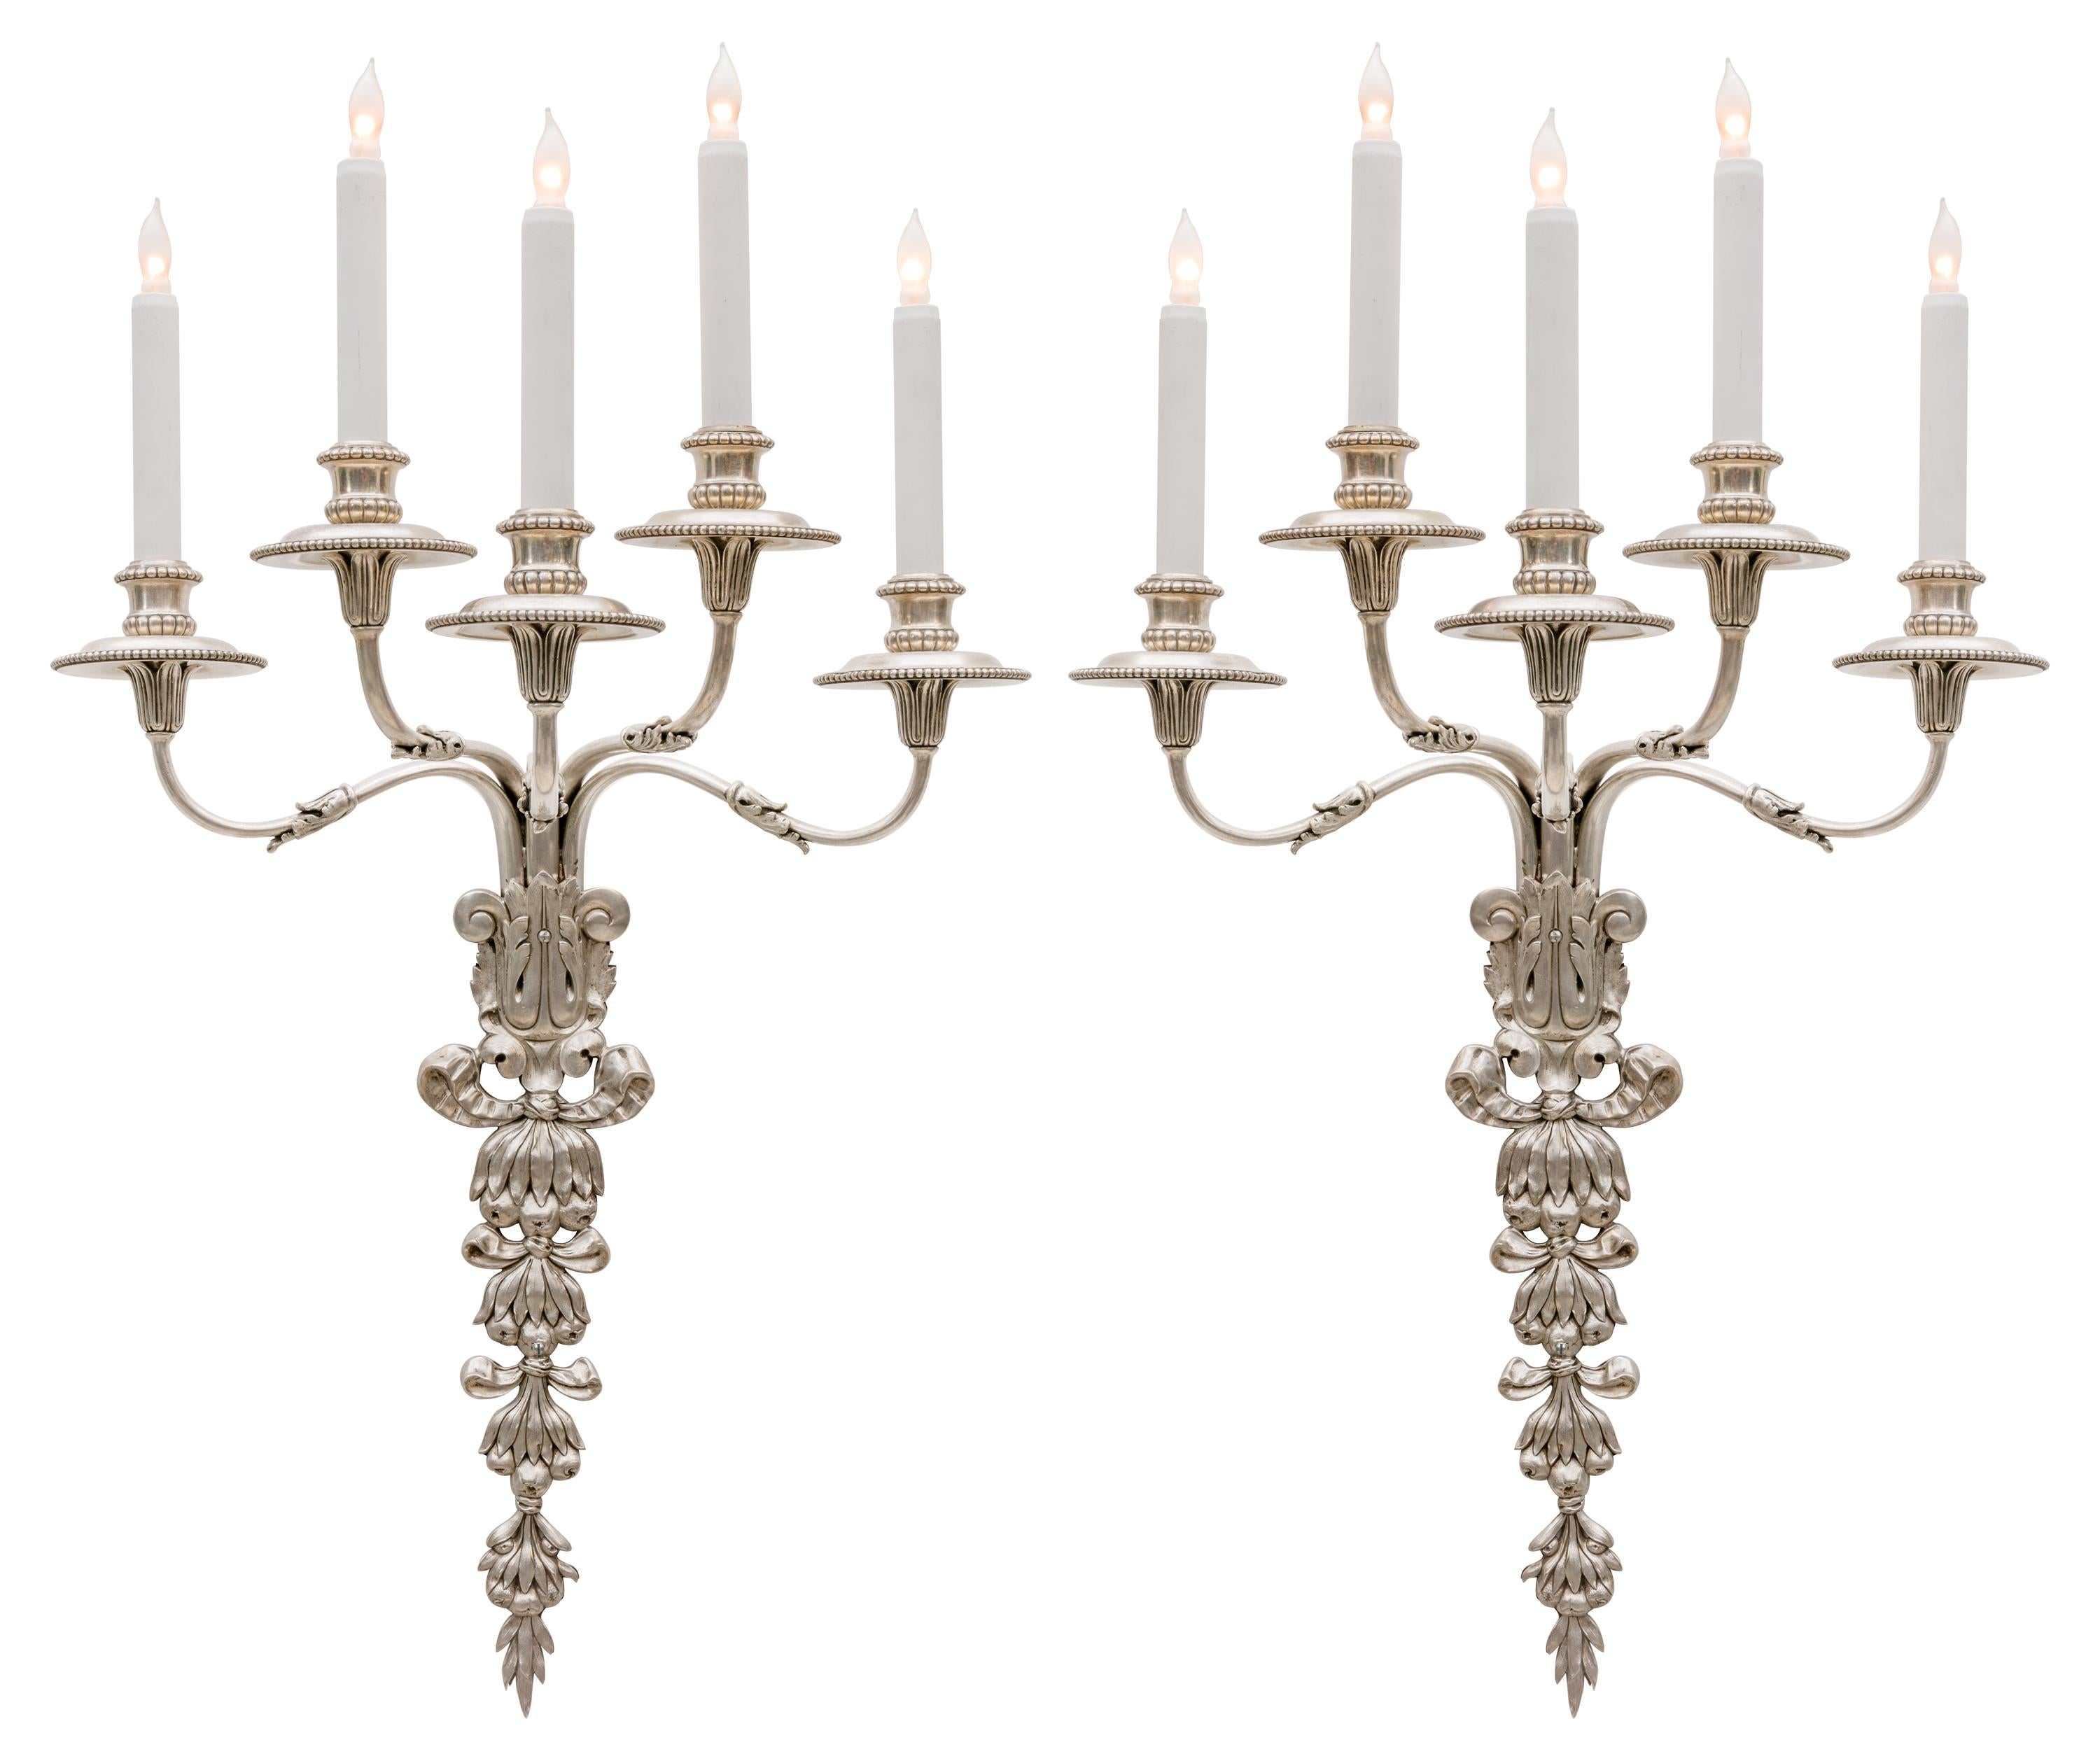 Edward F Caldwell & Co. Silvered Bronze Neoclassical Revival Sconces, USA 1900s